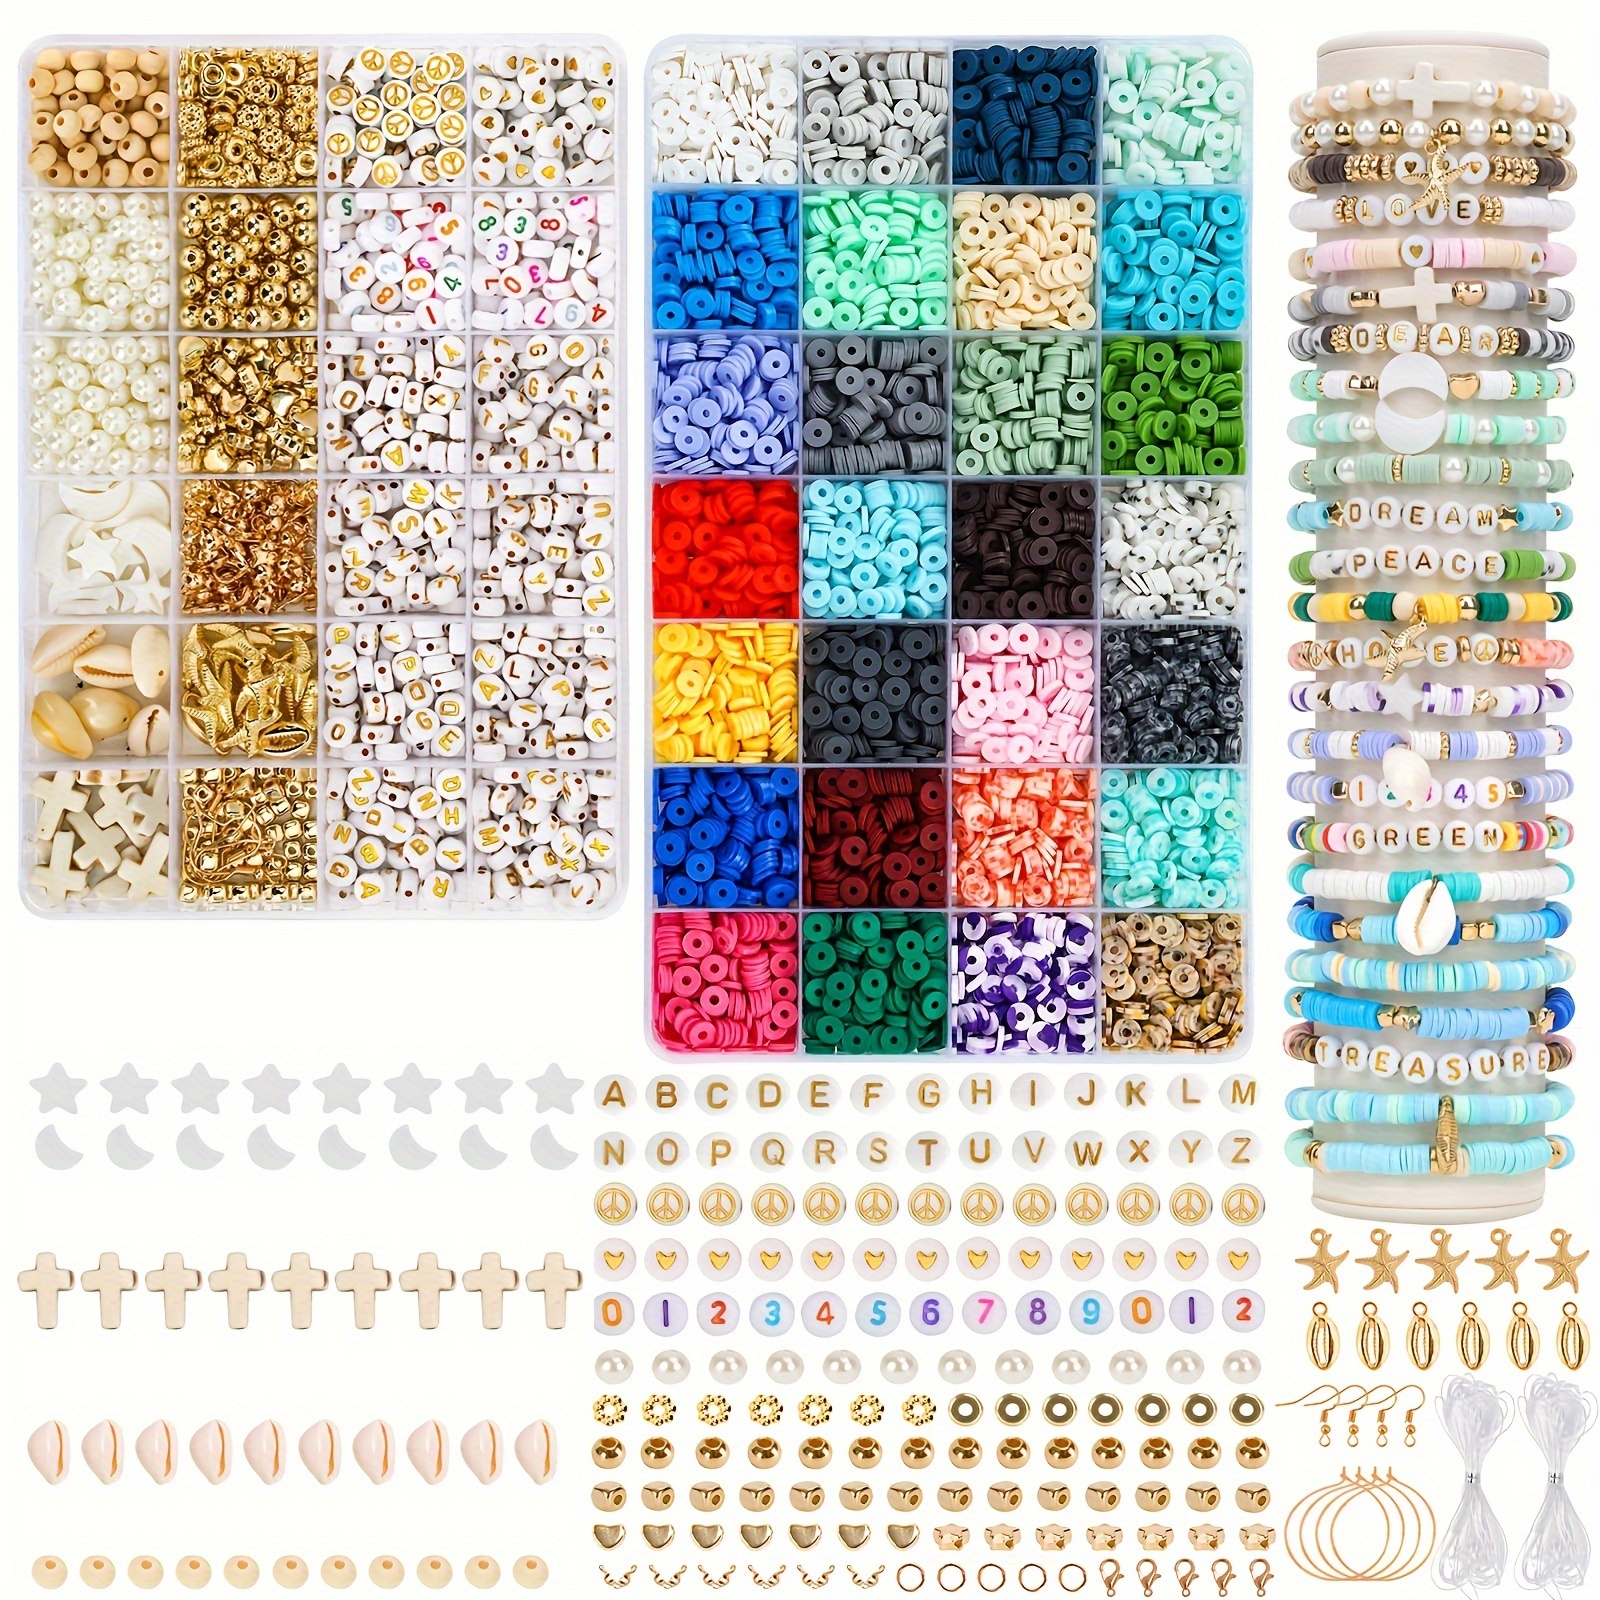 48 Colors 5mm Fuse Beads Kit Ironing Beads Pixel Art For DIY 3D Puzzles  Jewelry Making Crafts Handmade Gift Melting Beads Set